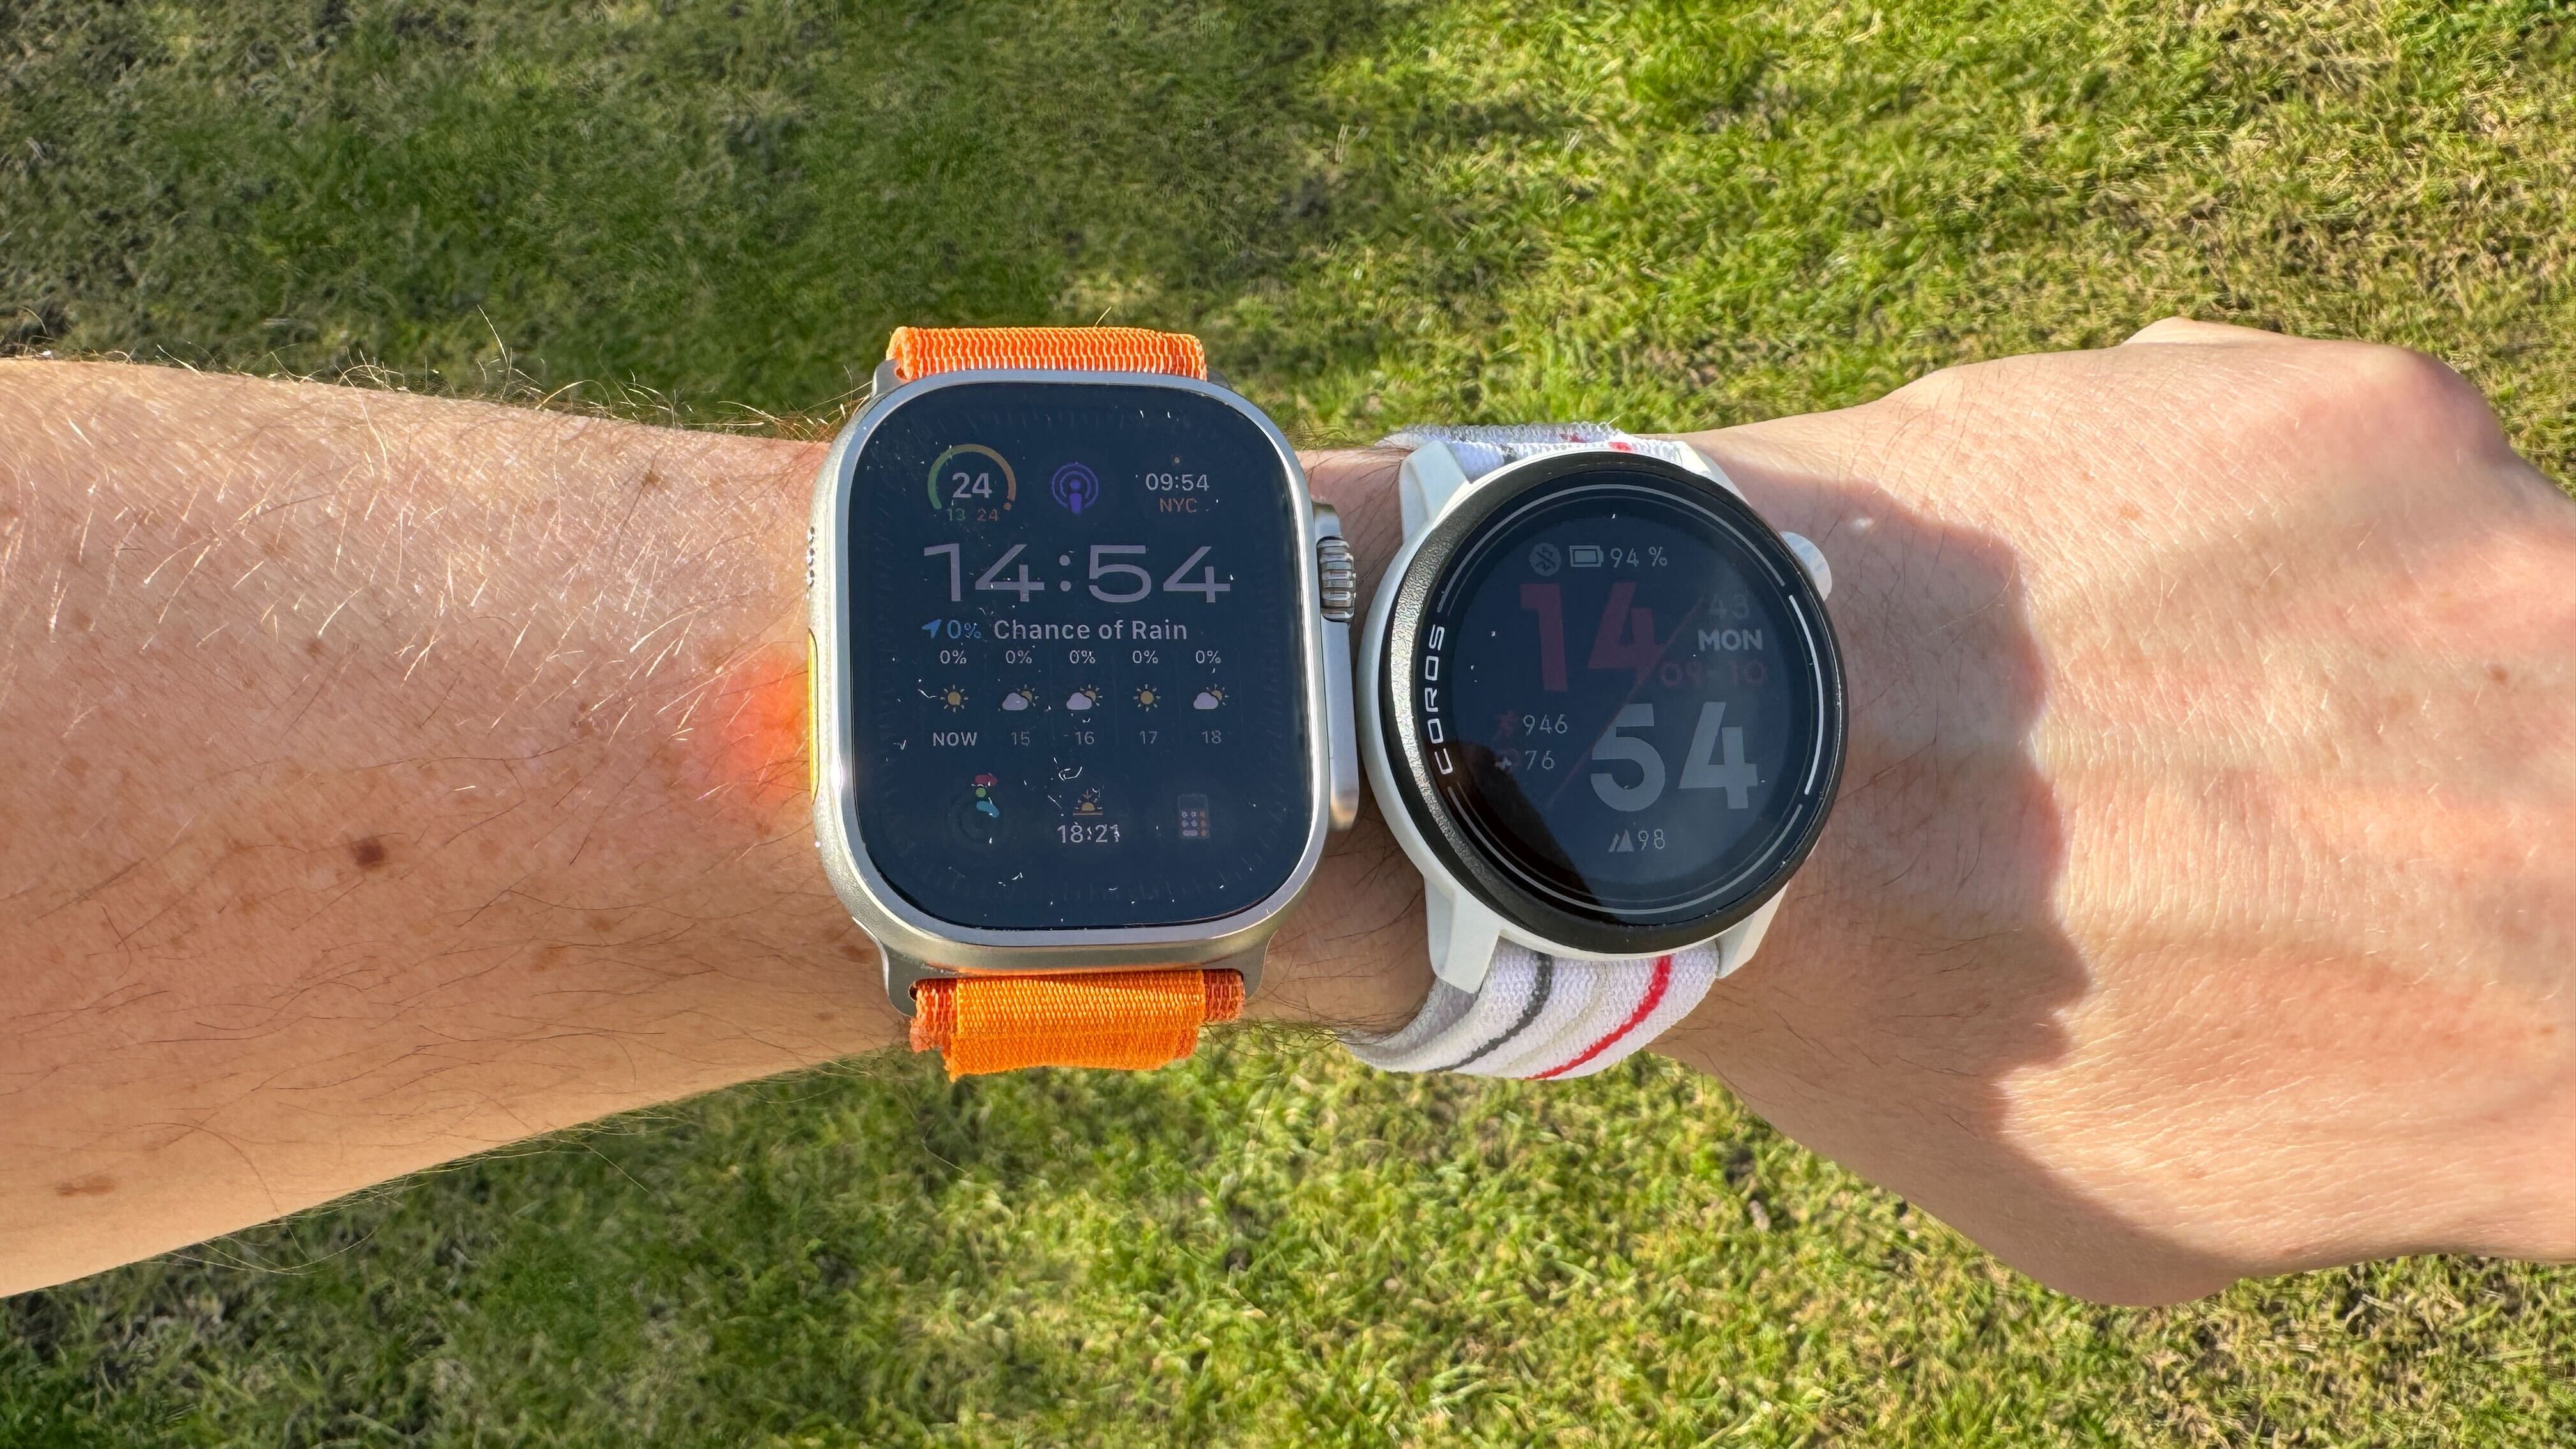 I ran a 10K with the Apple Watch Ultra 2 and Coros Pace 3 — and